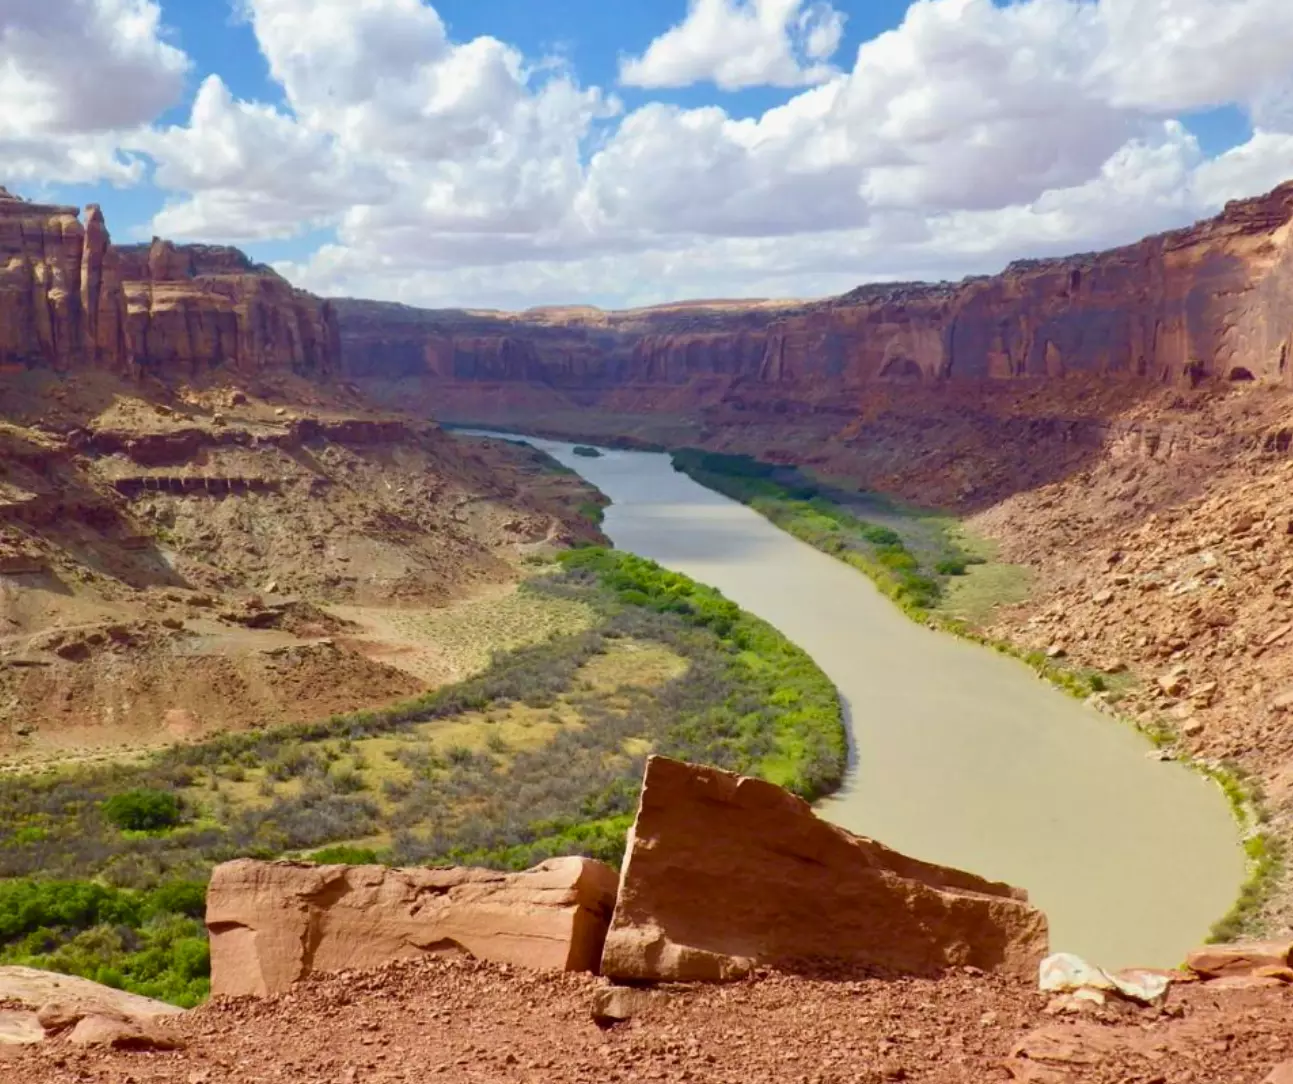 About Labyrinth Canyon on the Green River